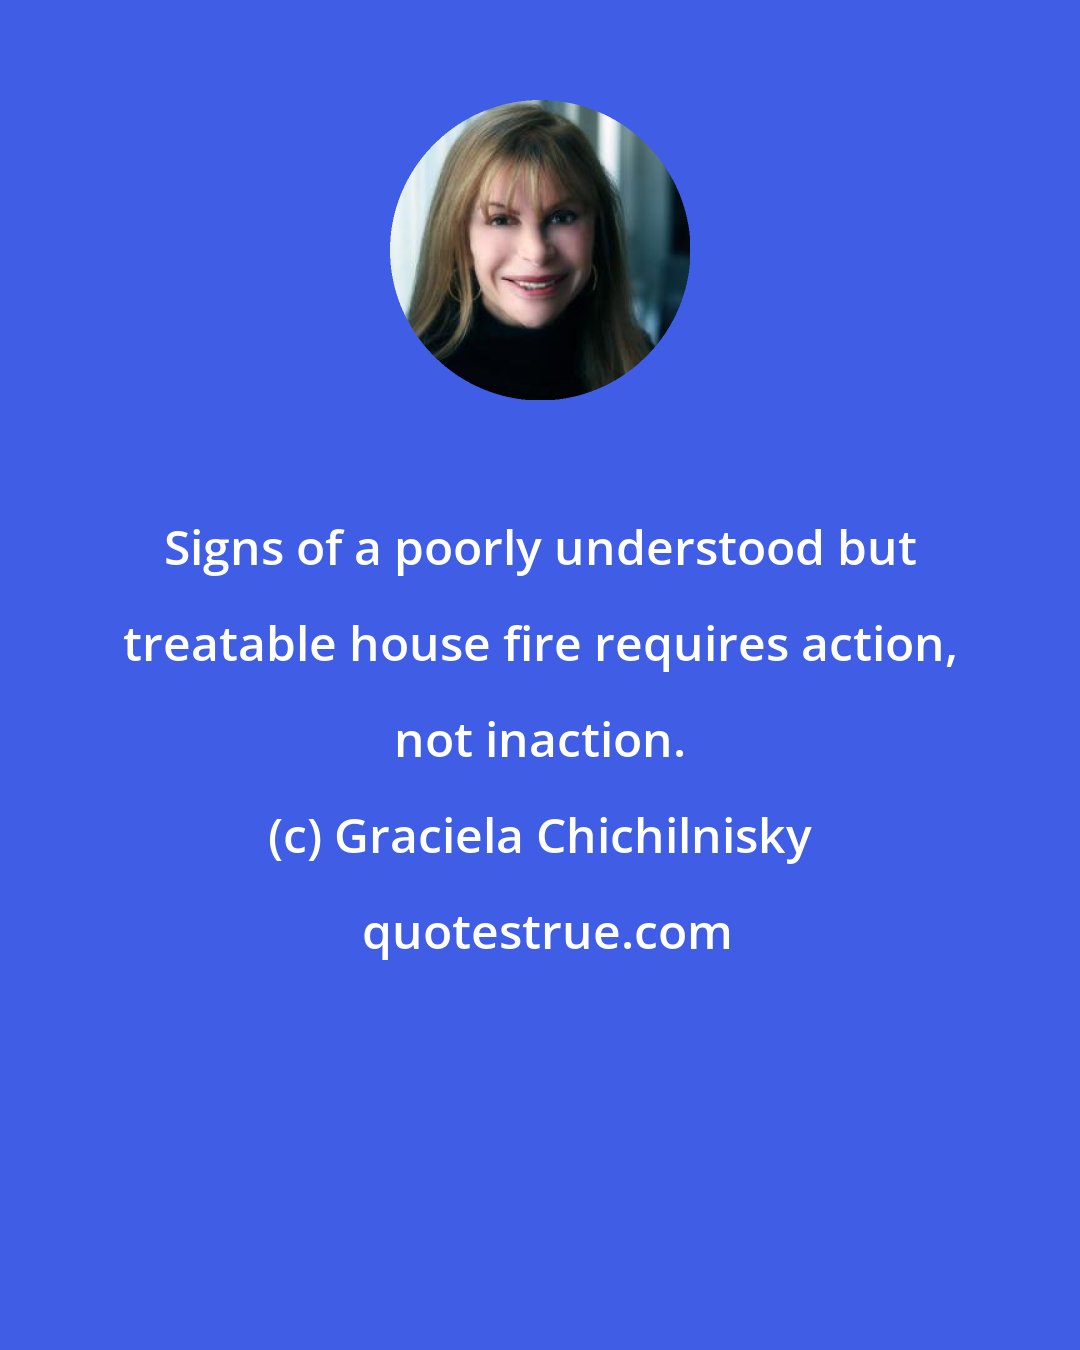 Graciela Chichilnisky: Signs of a poorly understood but treatable house fire requires action, not inaction.